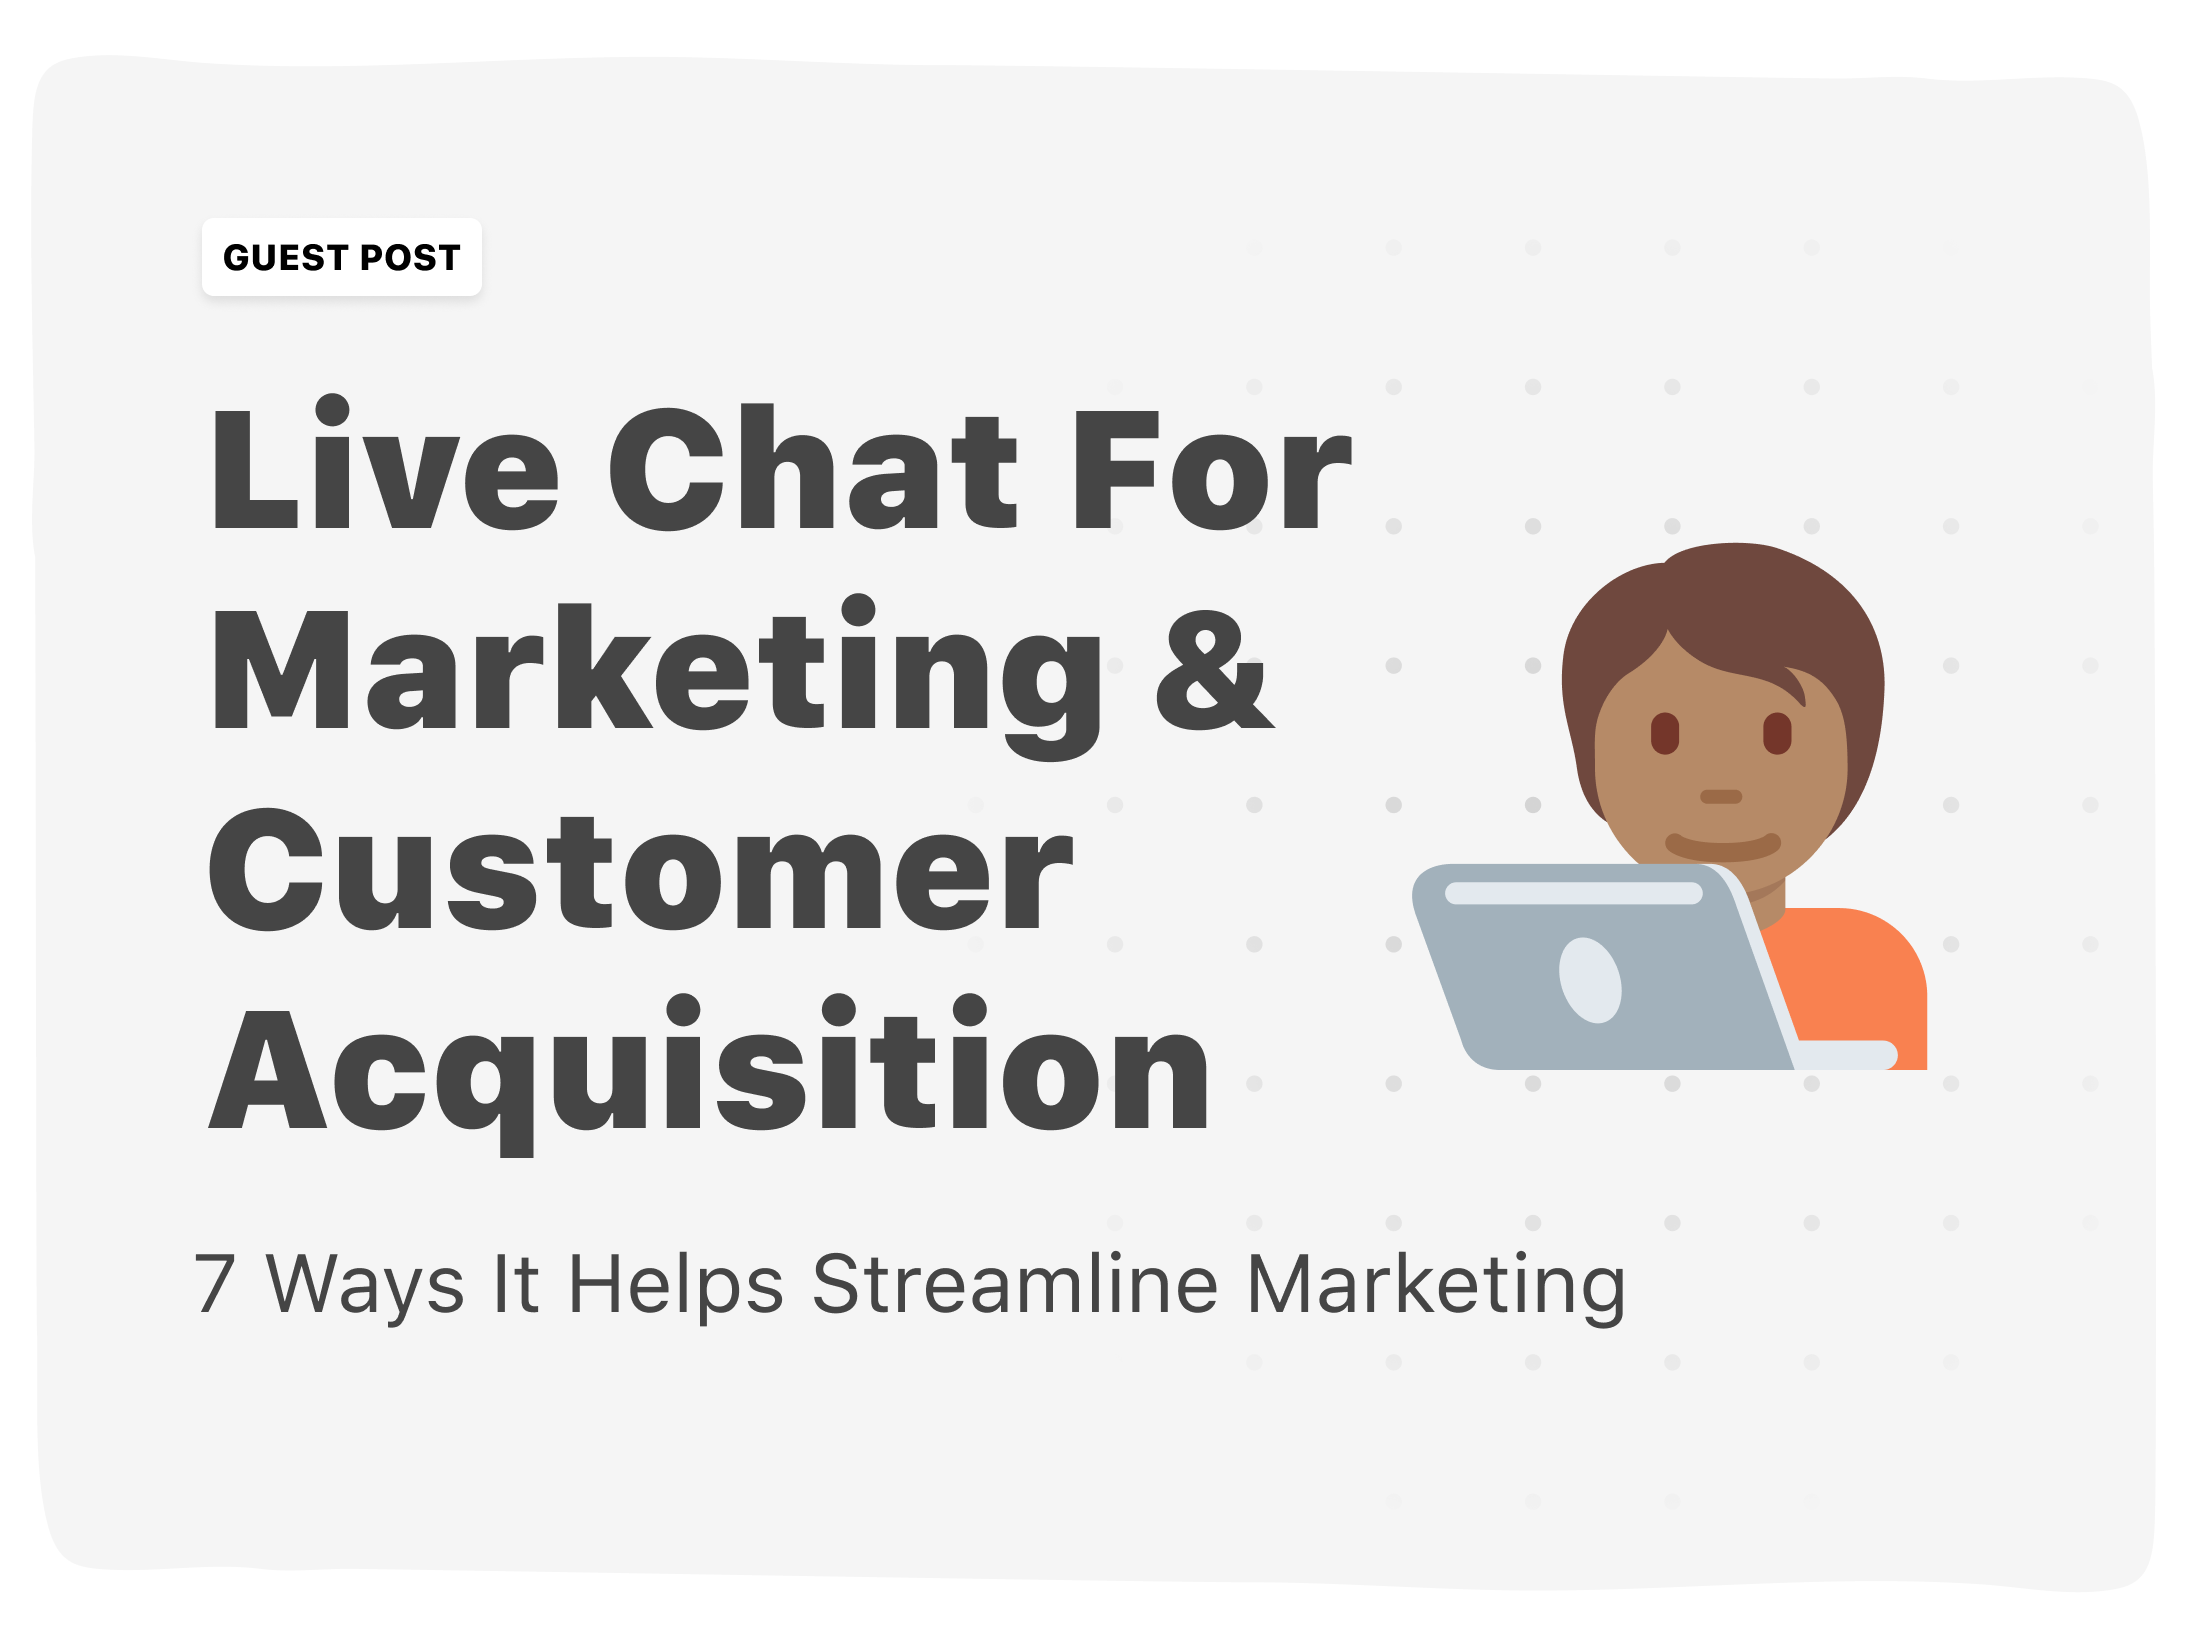 Live Chat As A Tool For Marketing & Customer Acquisition